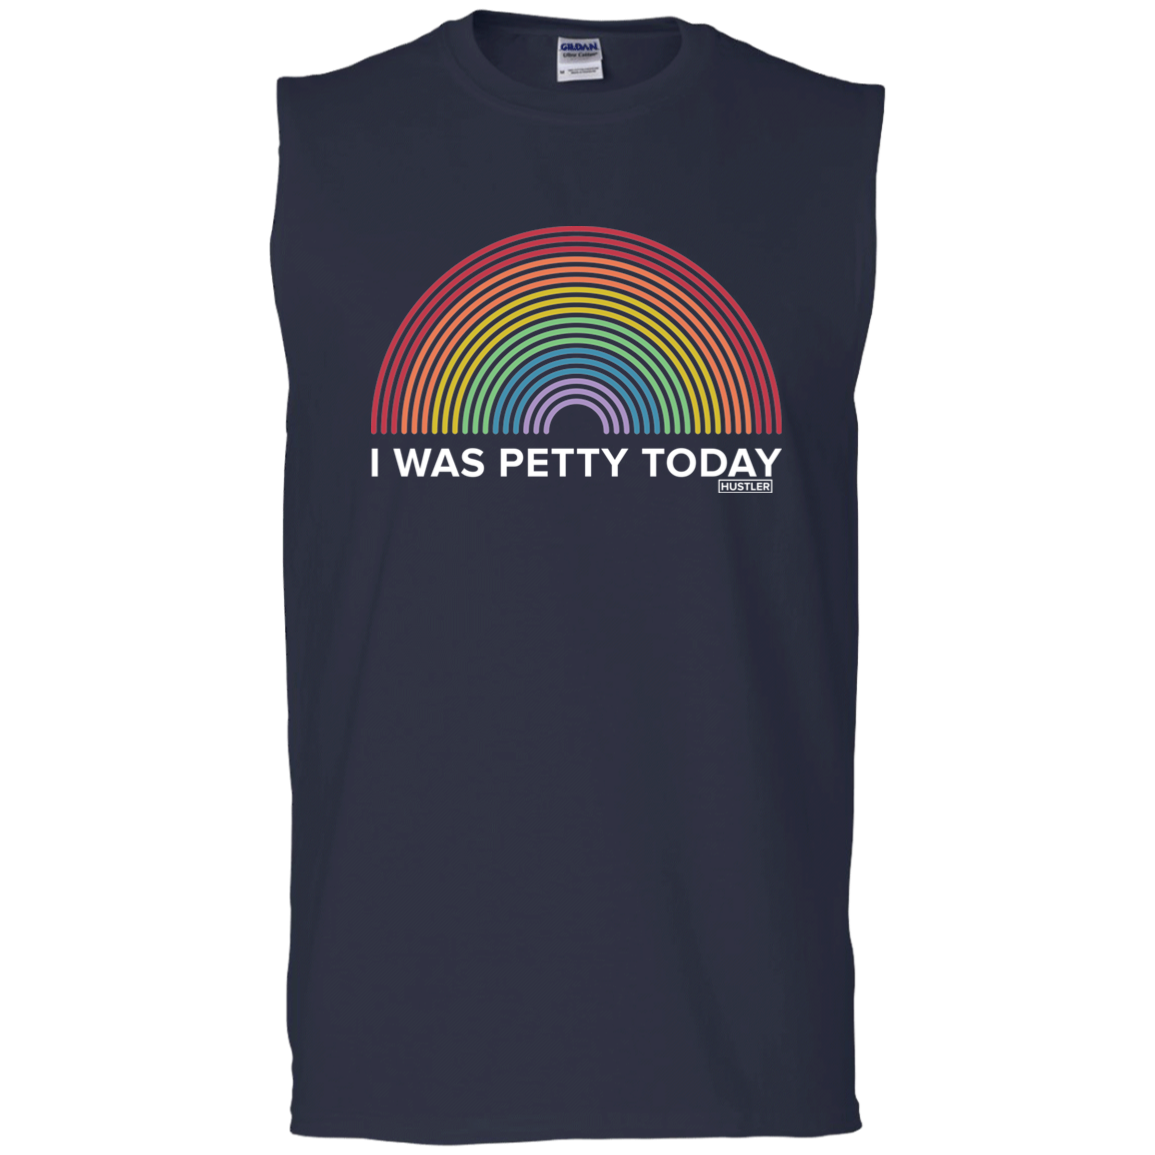 I Was Petty Today Hoodie